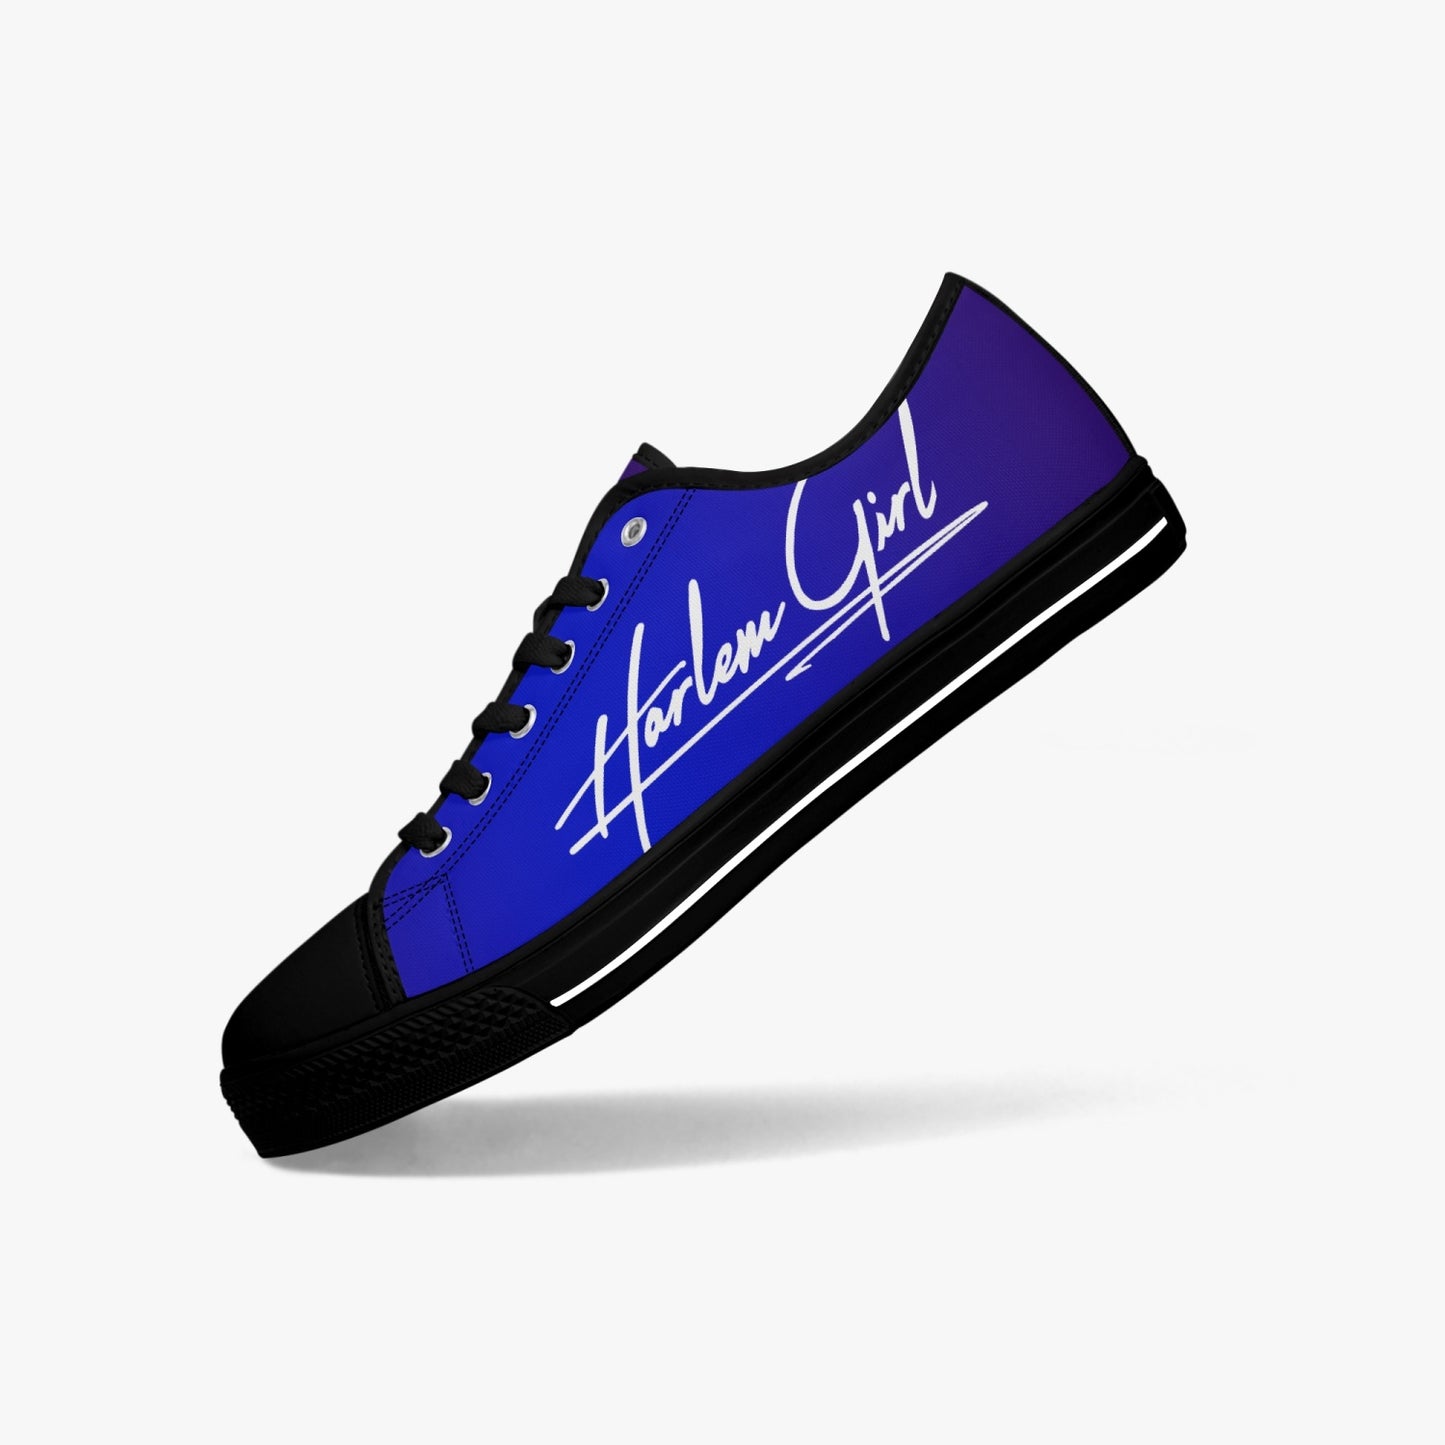 HB Harlem Girl "Lenox Ave" Classic Low Tops - Sapphire - Women (Black or White Sole)